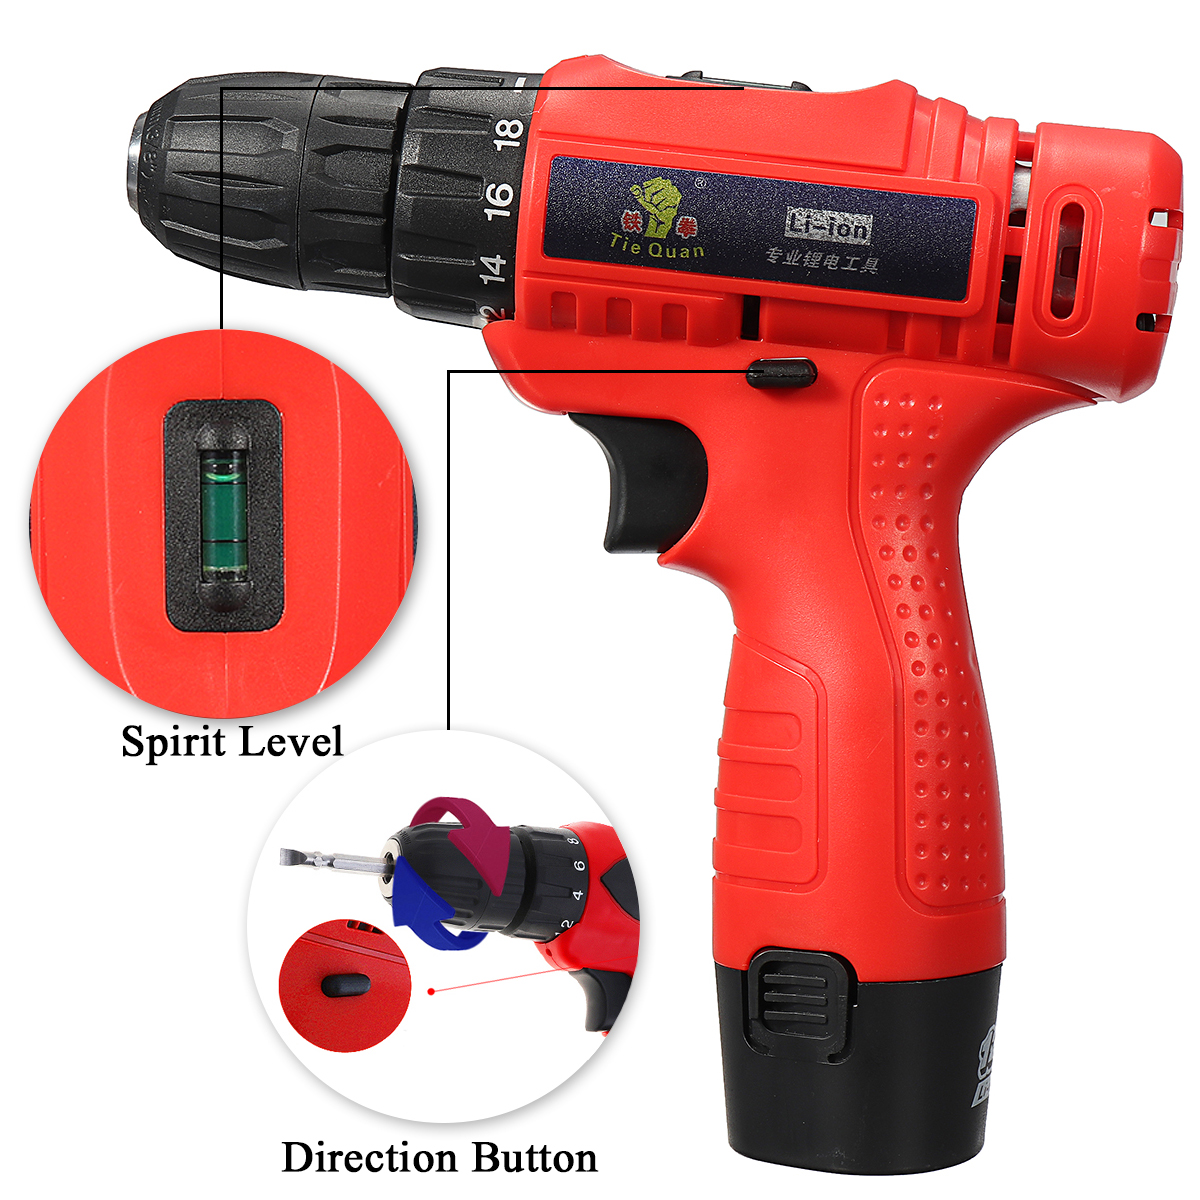 110V-240V-Cordless-Electric-Screwdriver-1-Battery-1-Charger-Drilling-Punching-Power-Tools-1287724-9